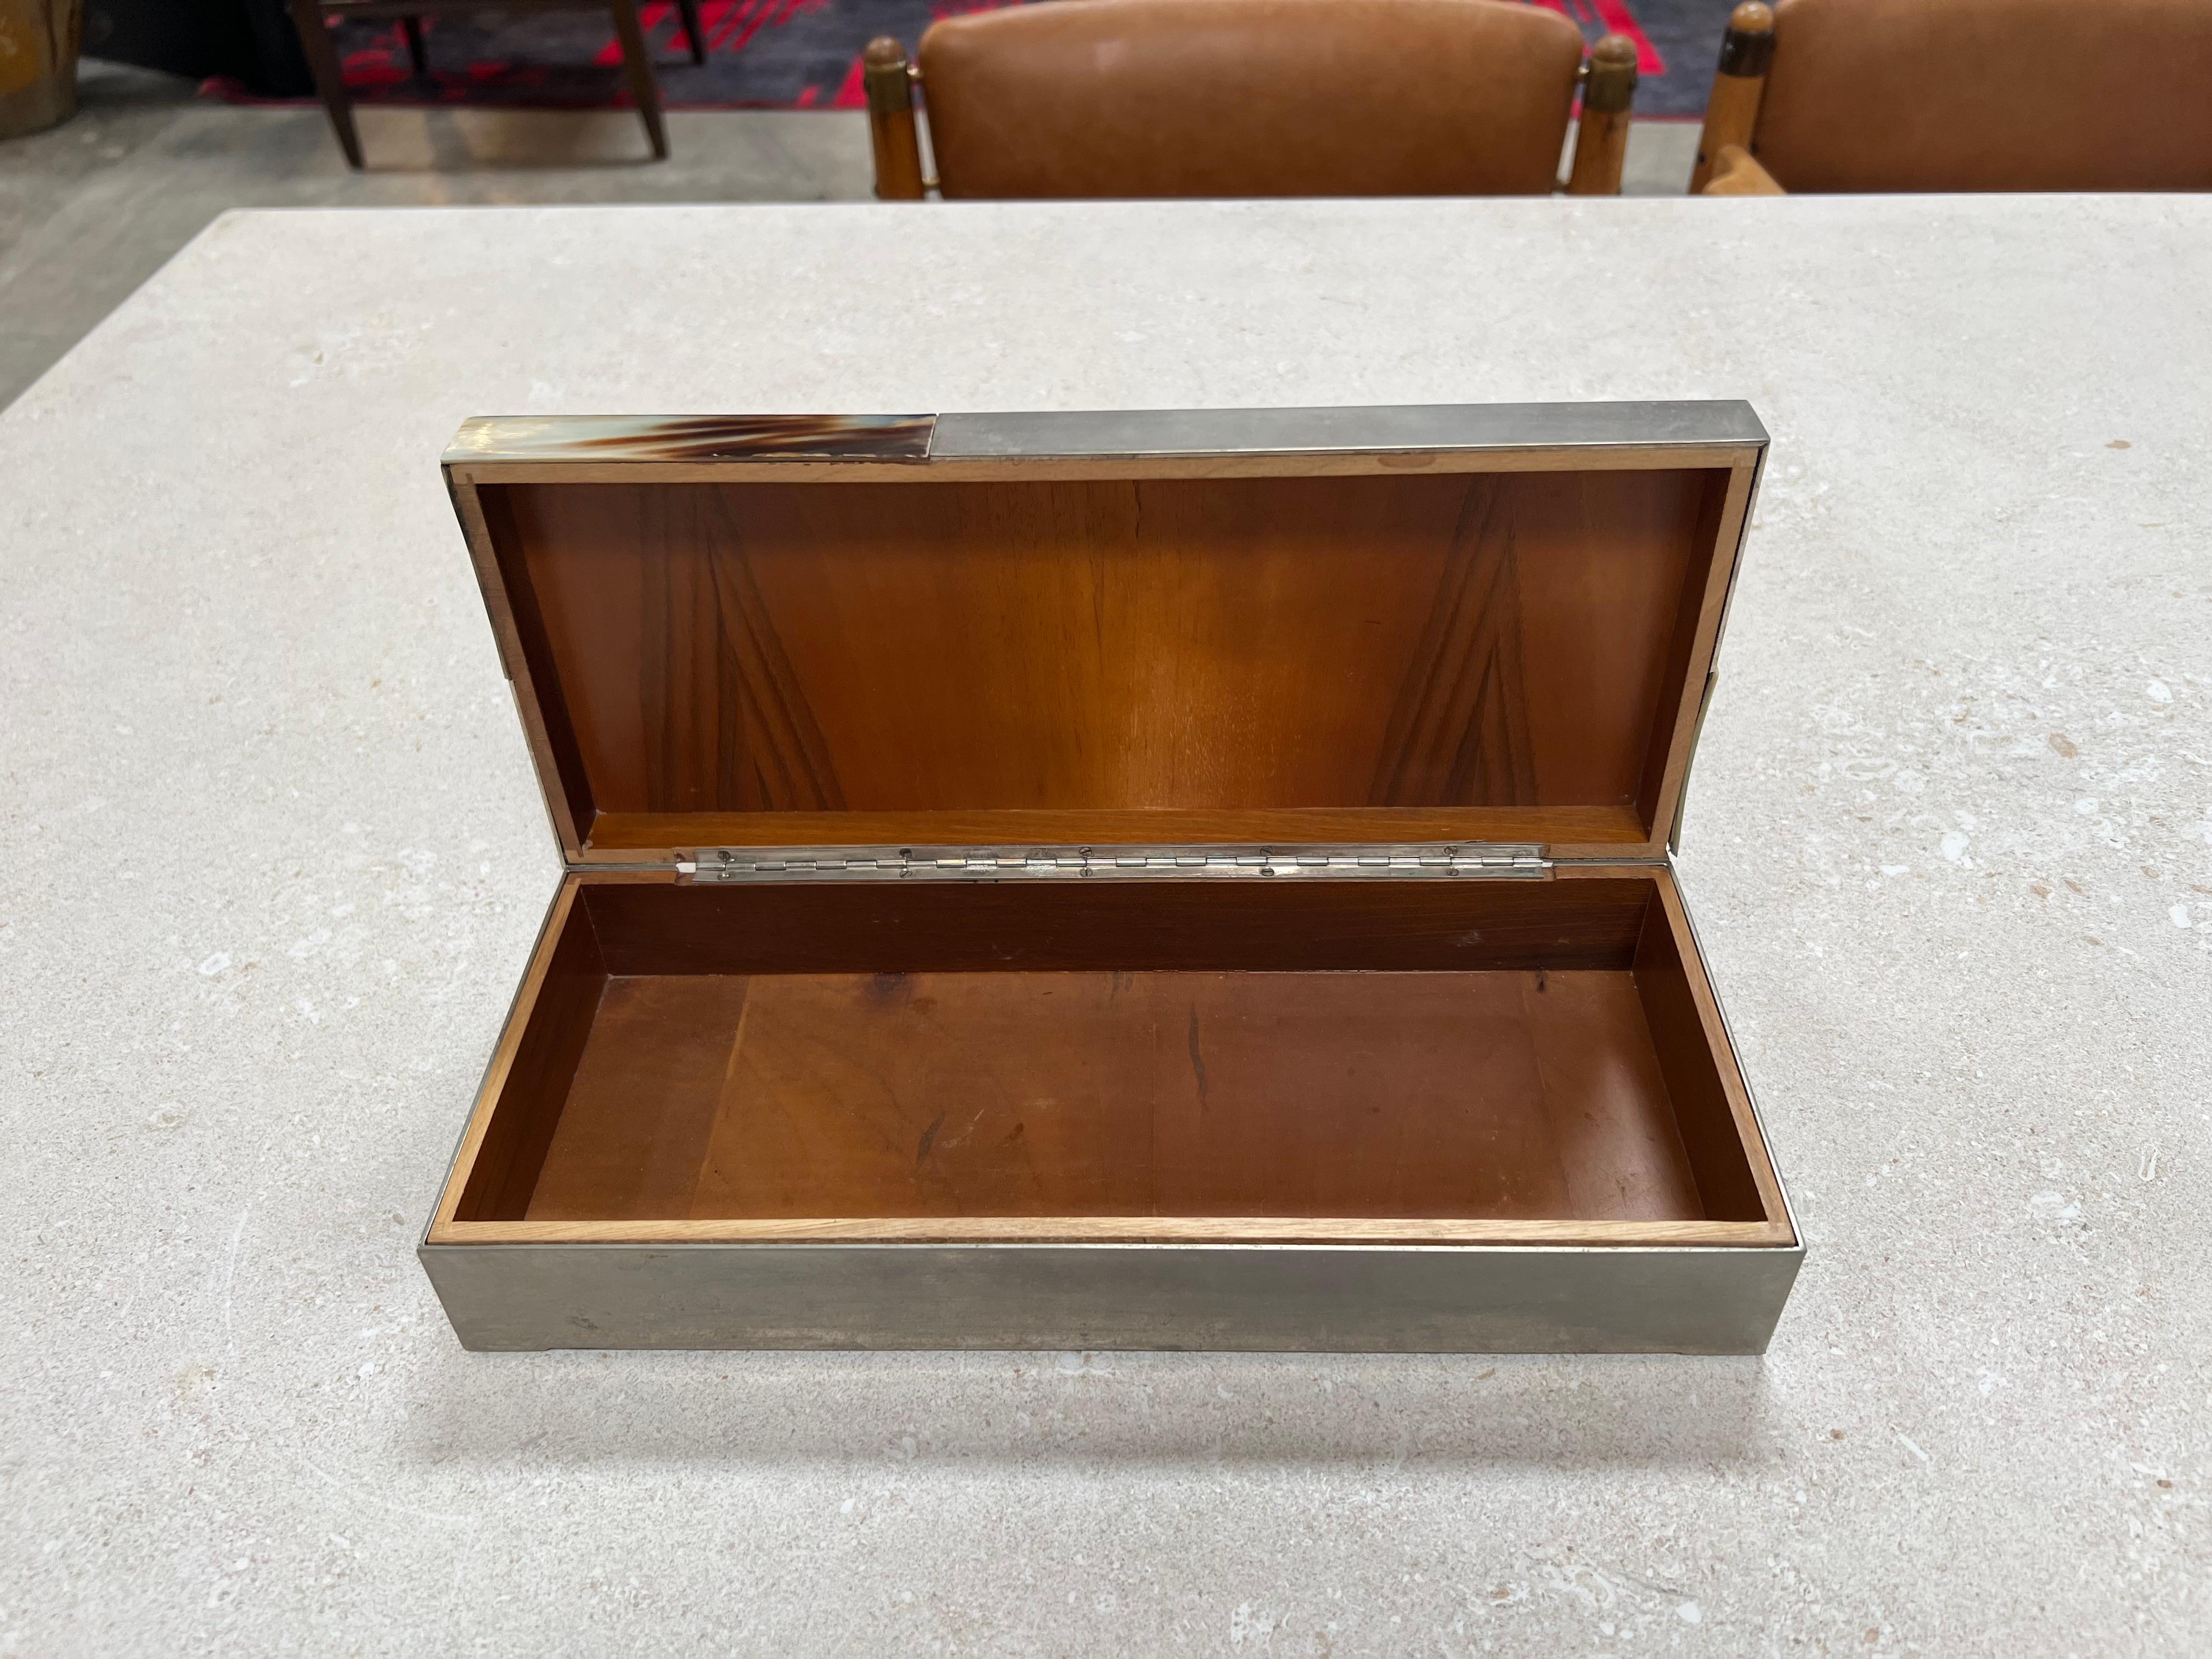 Vintage Italian Rectangular Decorative Box 1980s In Good Condition For Sale In Los Angeles, CA